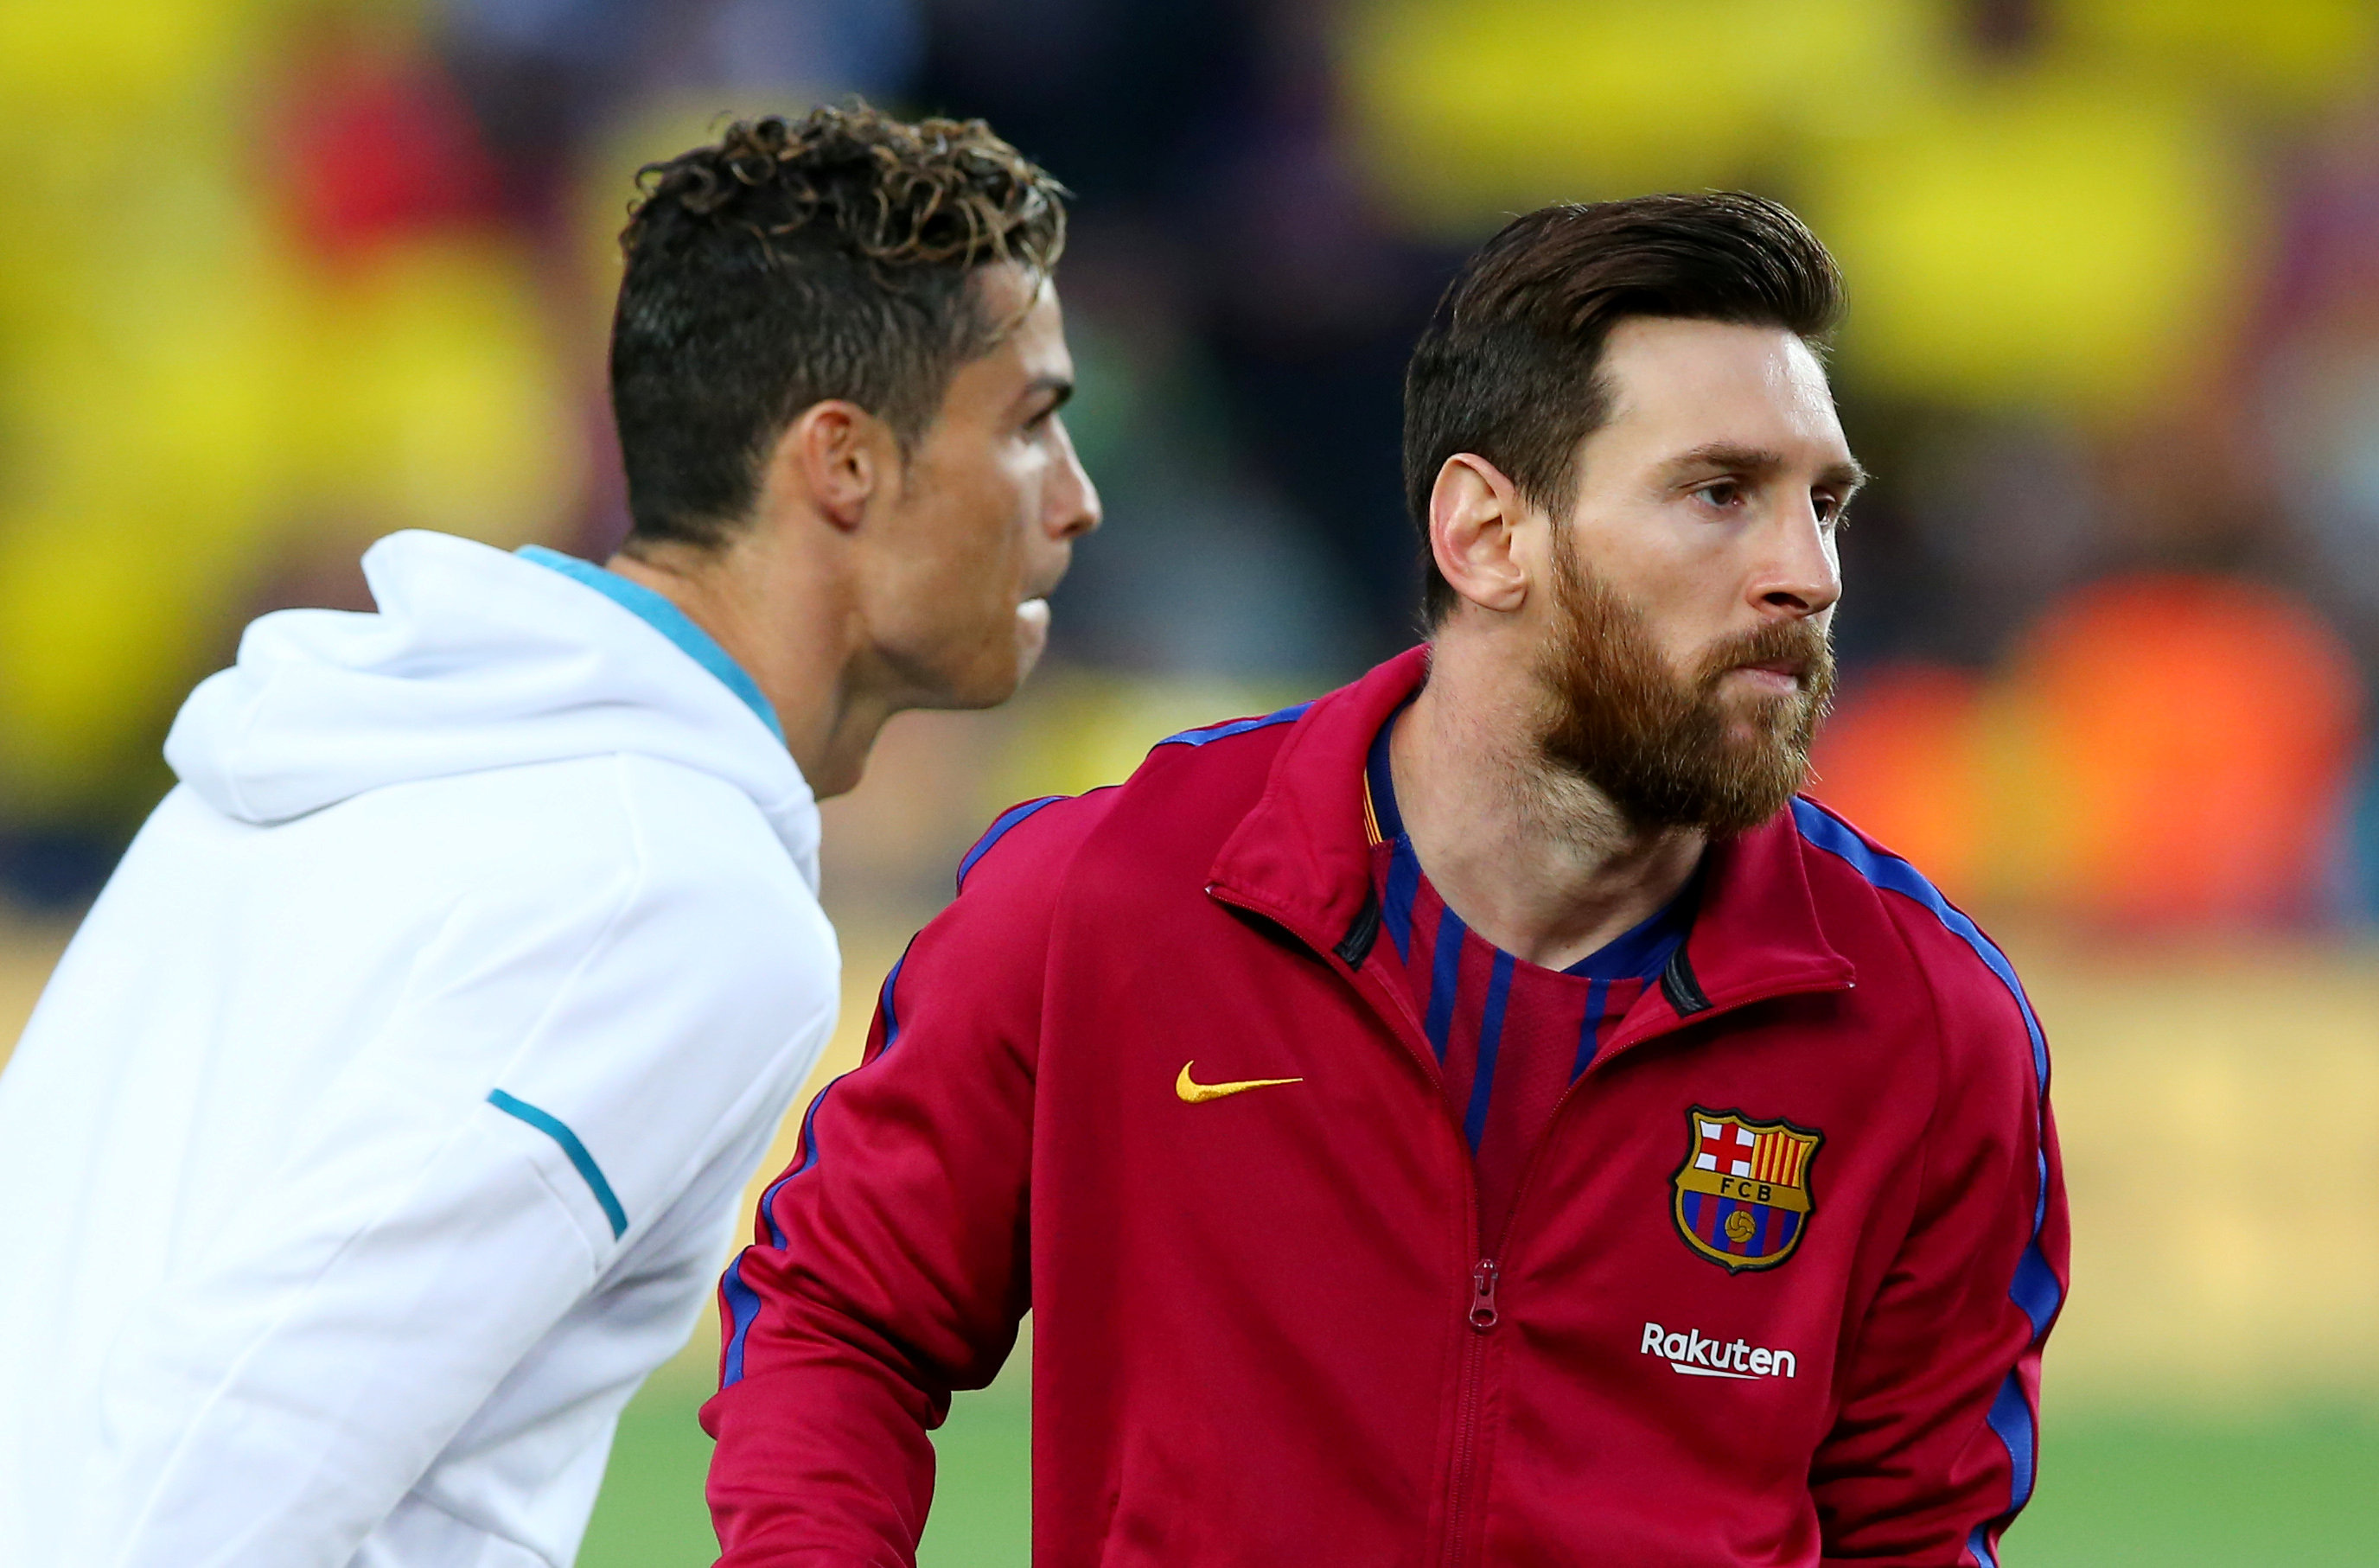 Fact Check: Is Messi And Ronaldo Picture Edited Or Real?